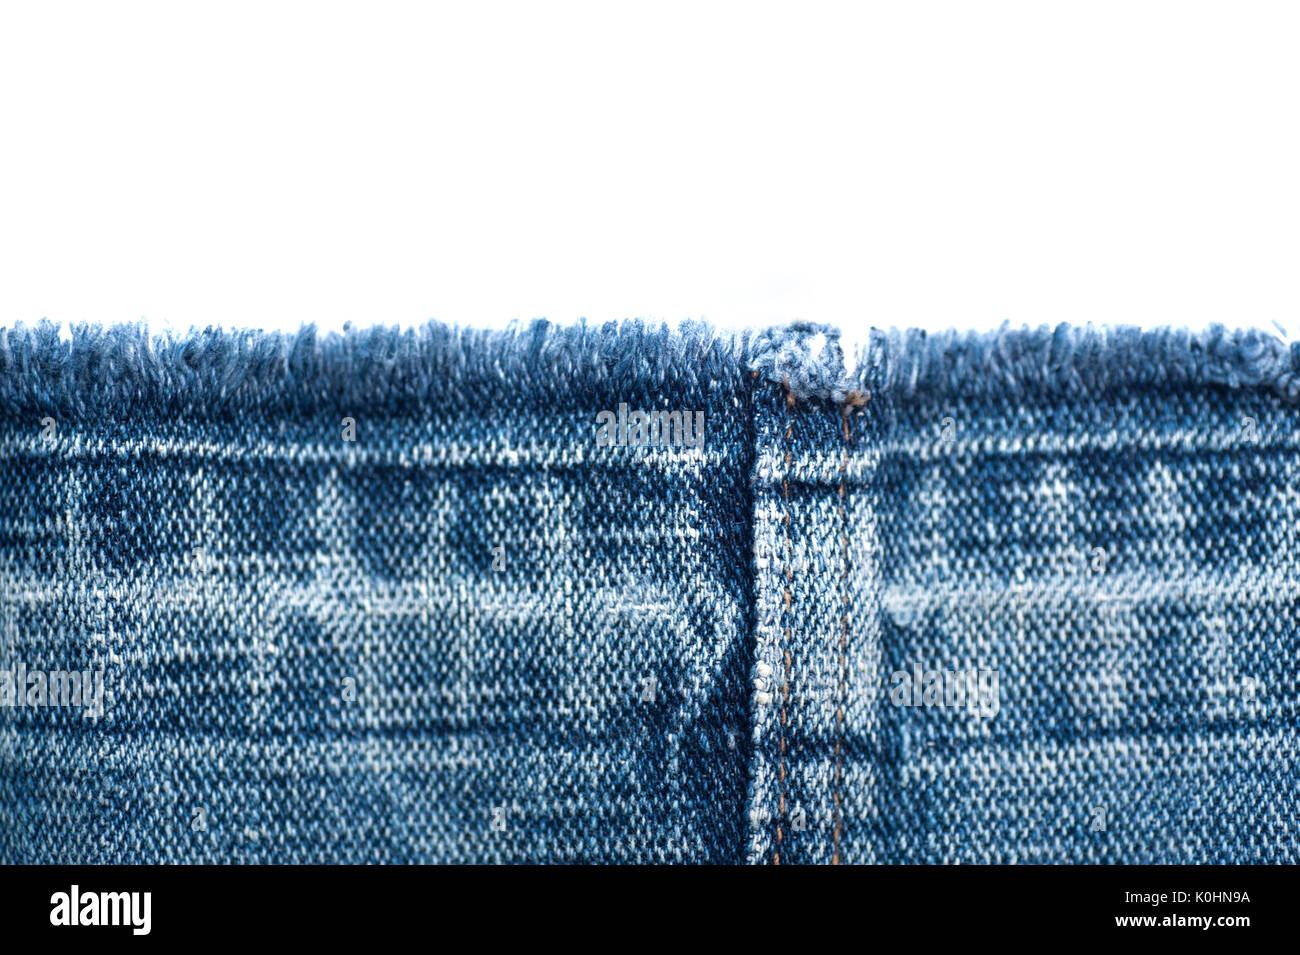 Fabric texture of jeans and white background with place for text Stock Photo